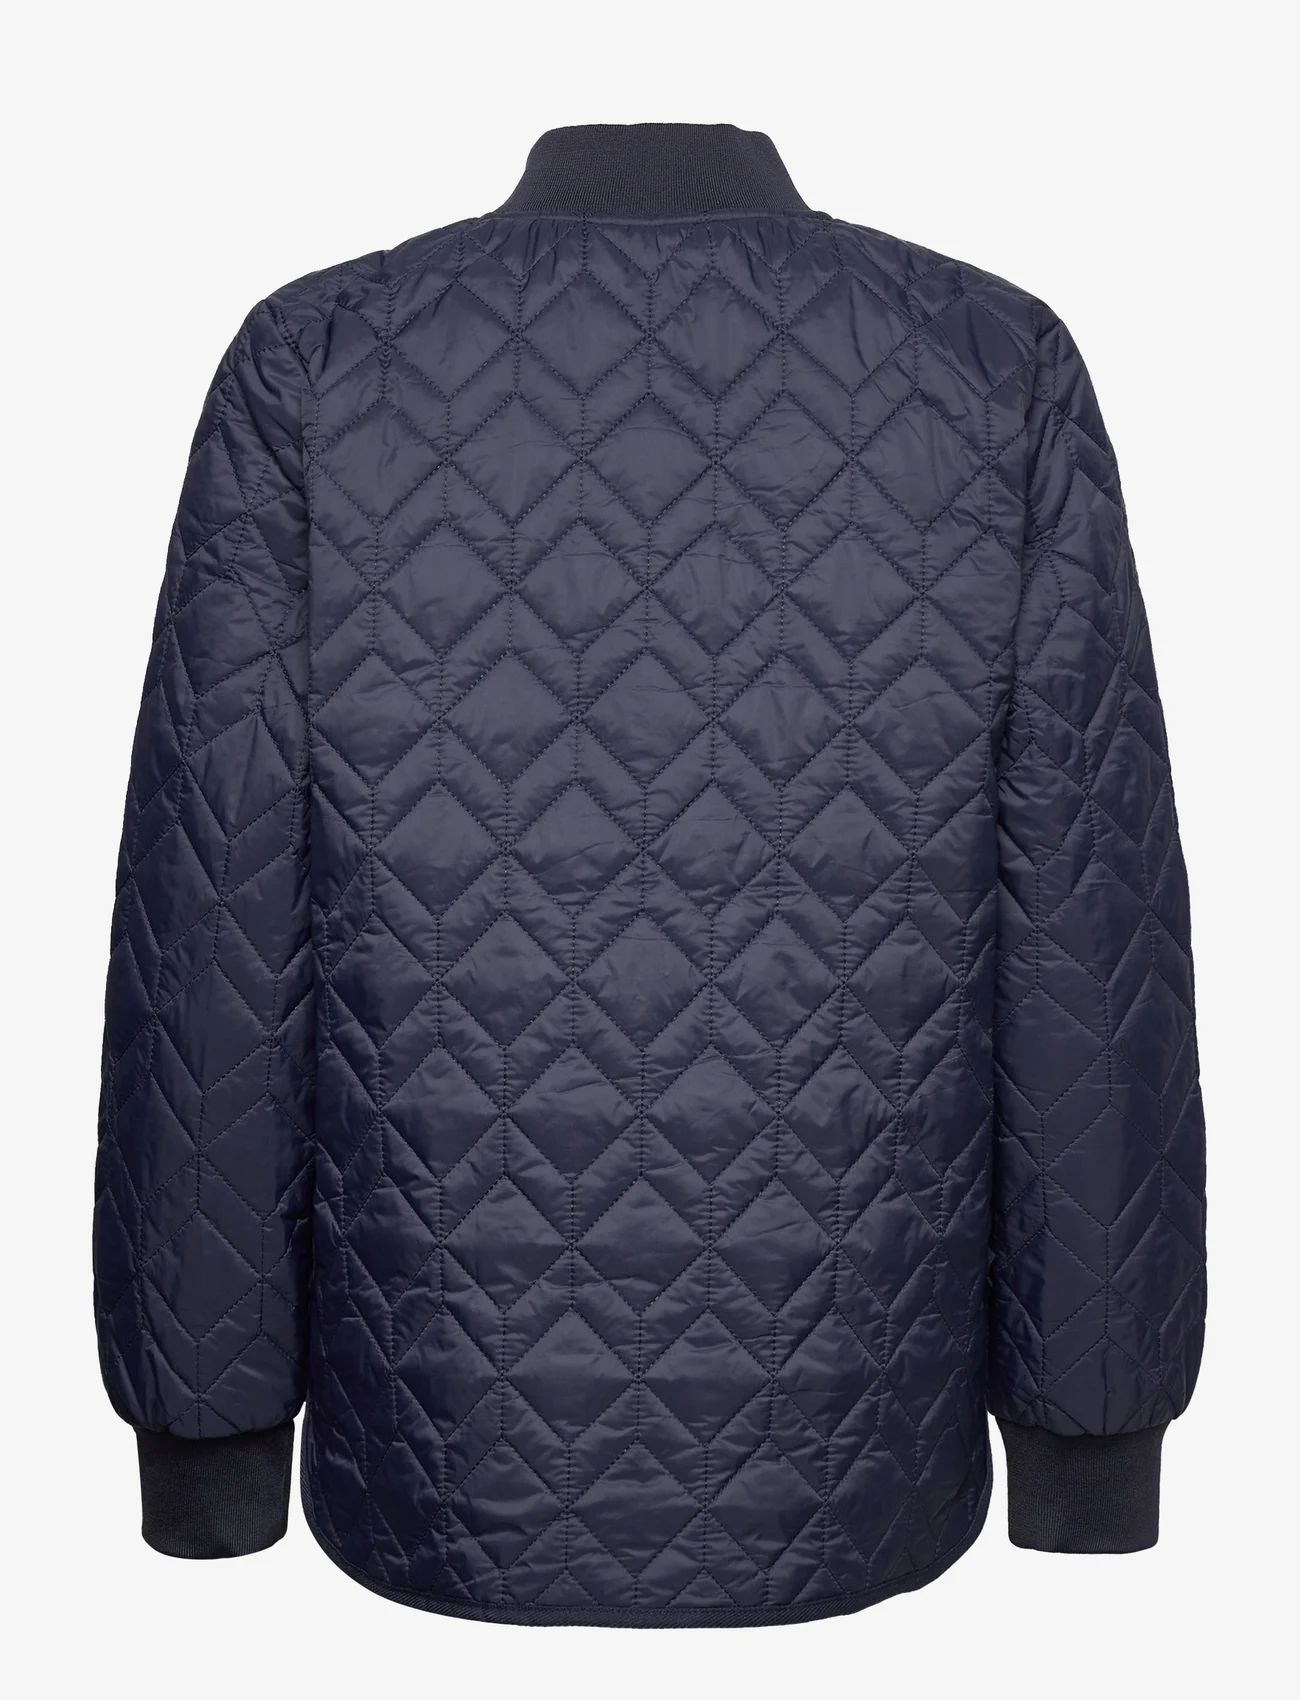 Esprit Collection - Quilted jacket with rib knit collar - quilted jackets - navy - 1